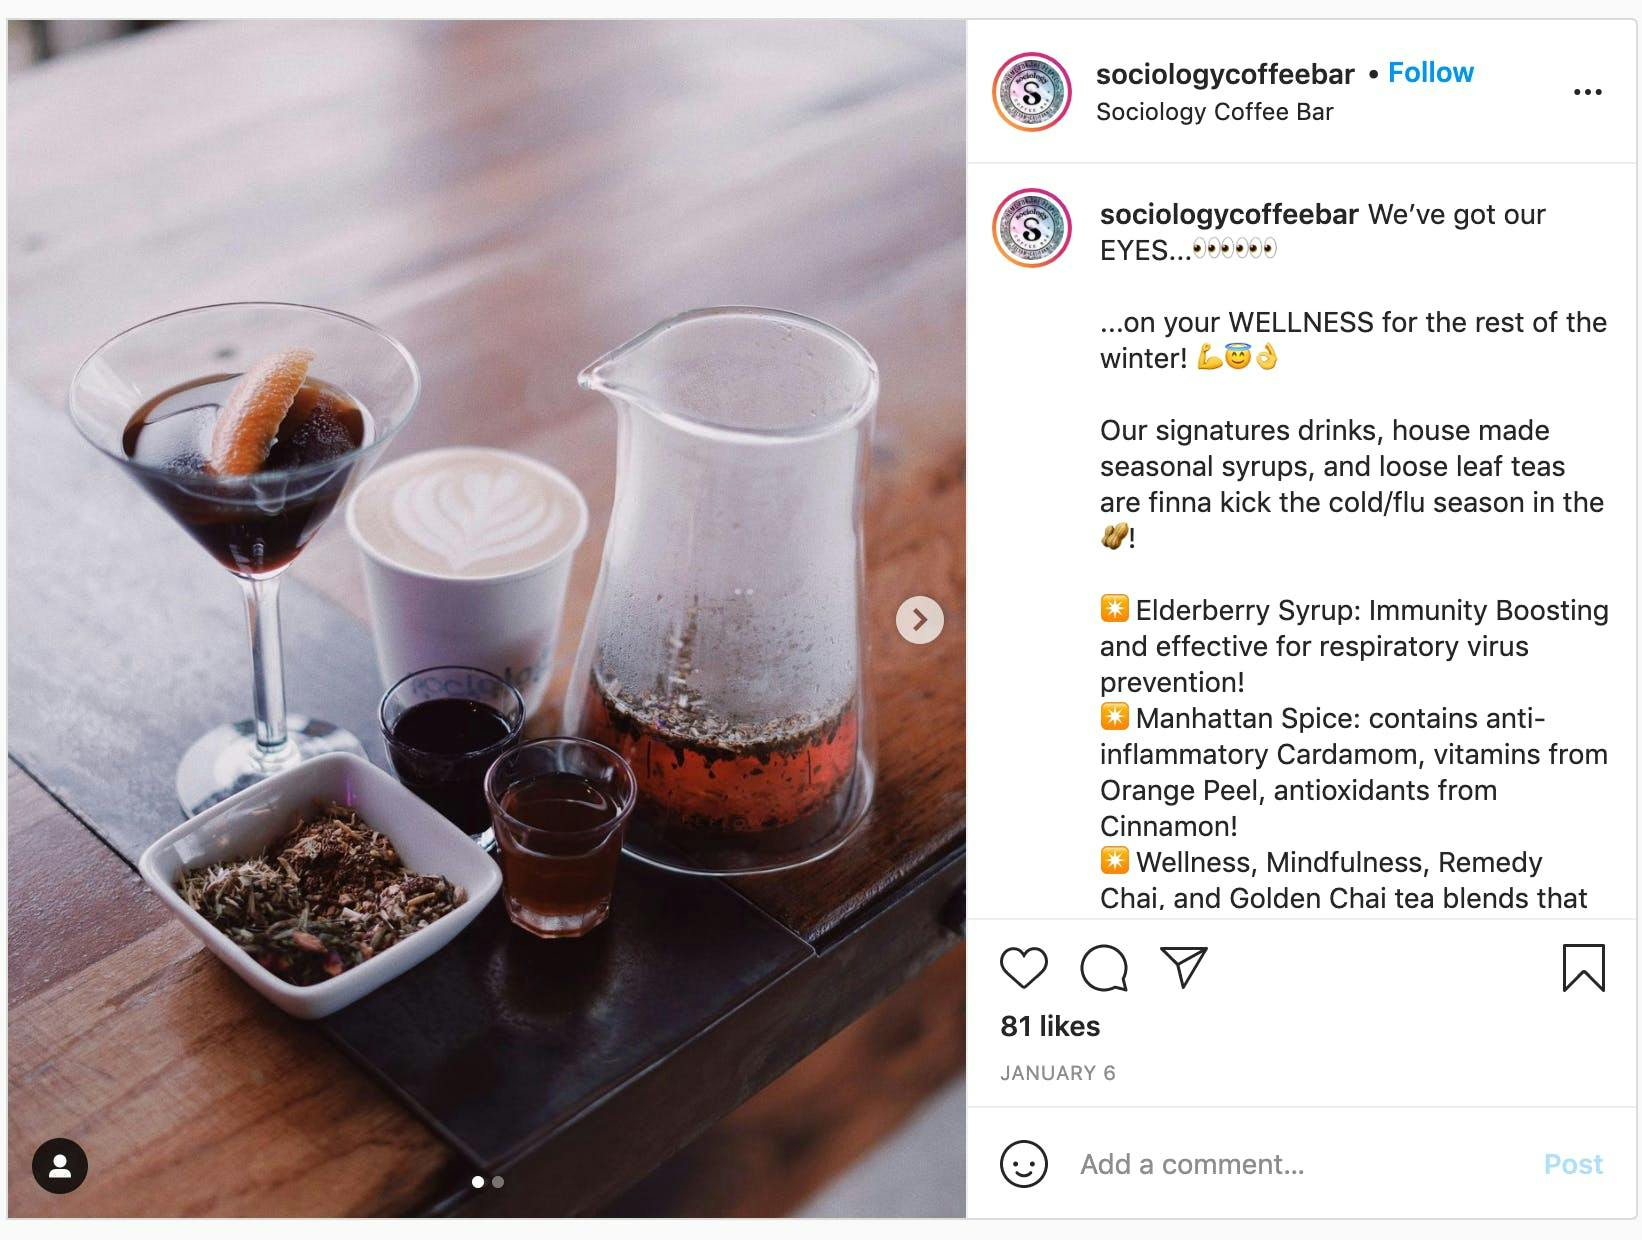 An Instagram post by the small business Sociology Coffee Bar about their signature drinks for the winter months.